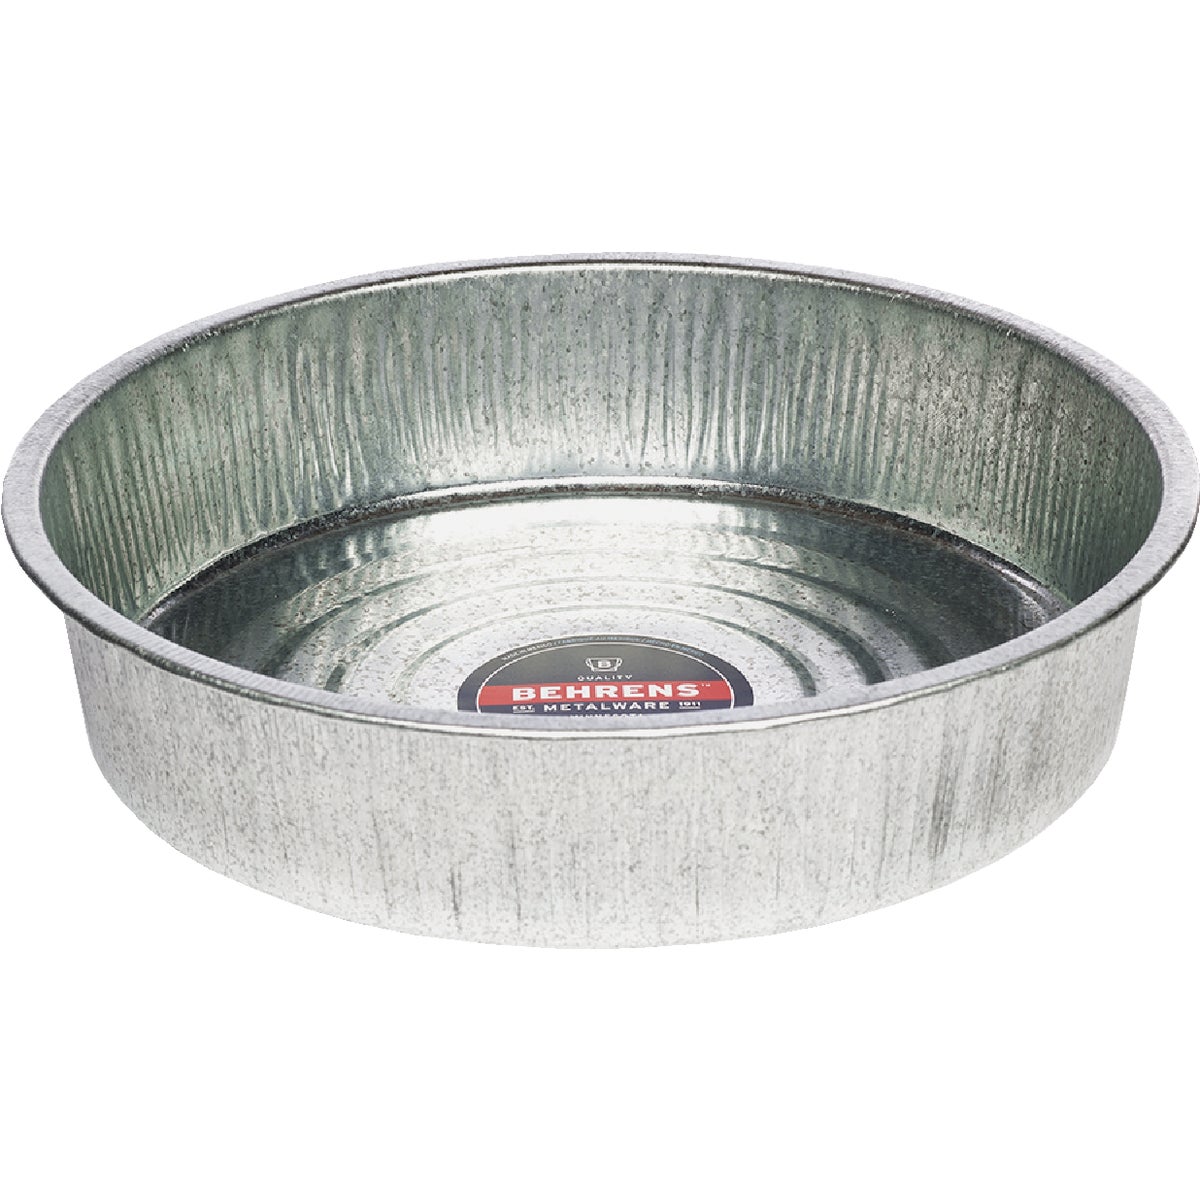 Item 629014, Galvanized construction. Seamless with reinforced wire rim.